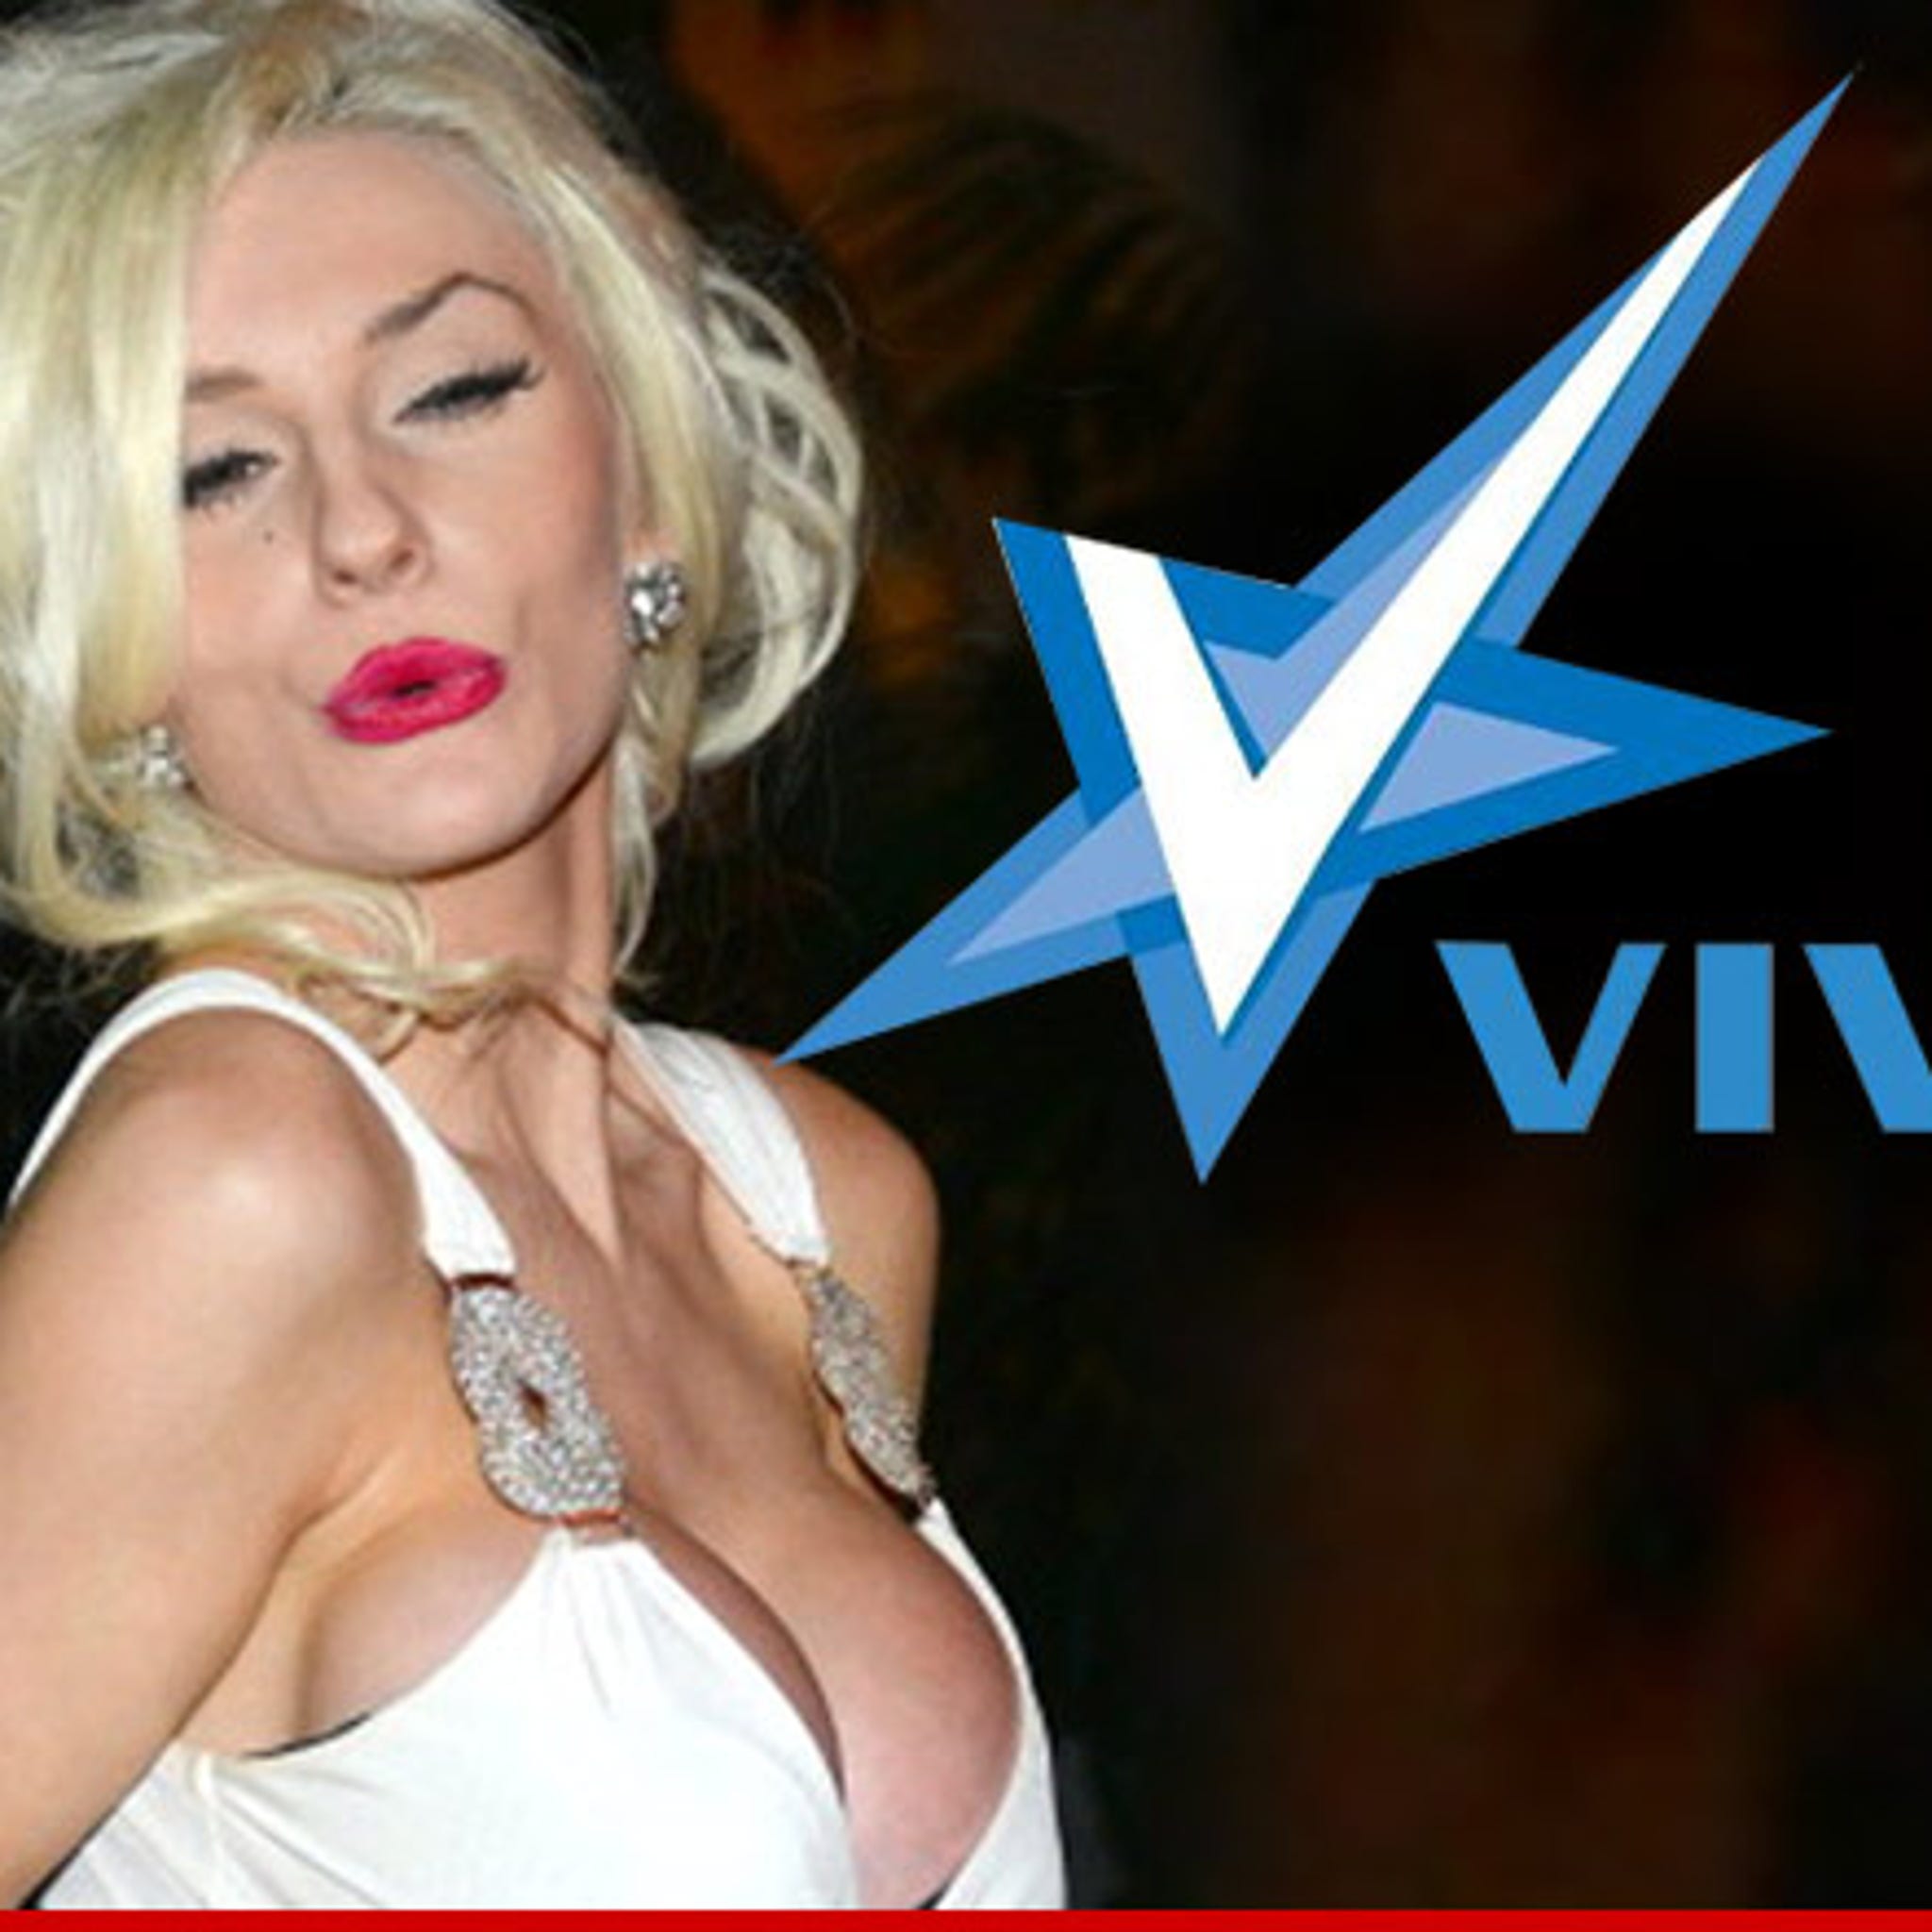 Solo Sex Video On Rajwap - Courtney Stodden -- I'm a Porn Star, Officially ... But Only for Charity